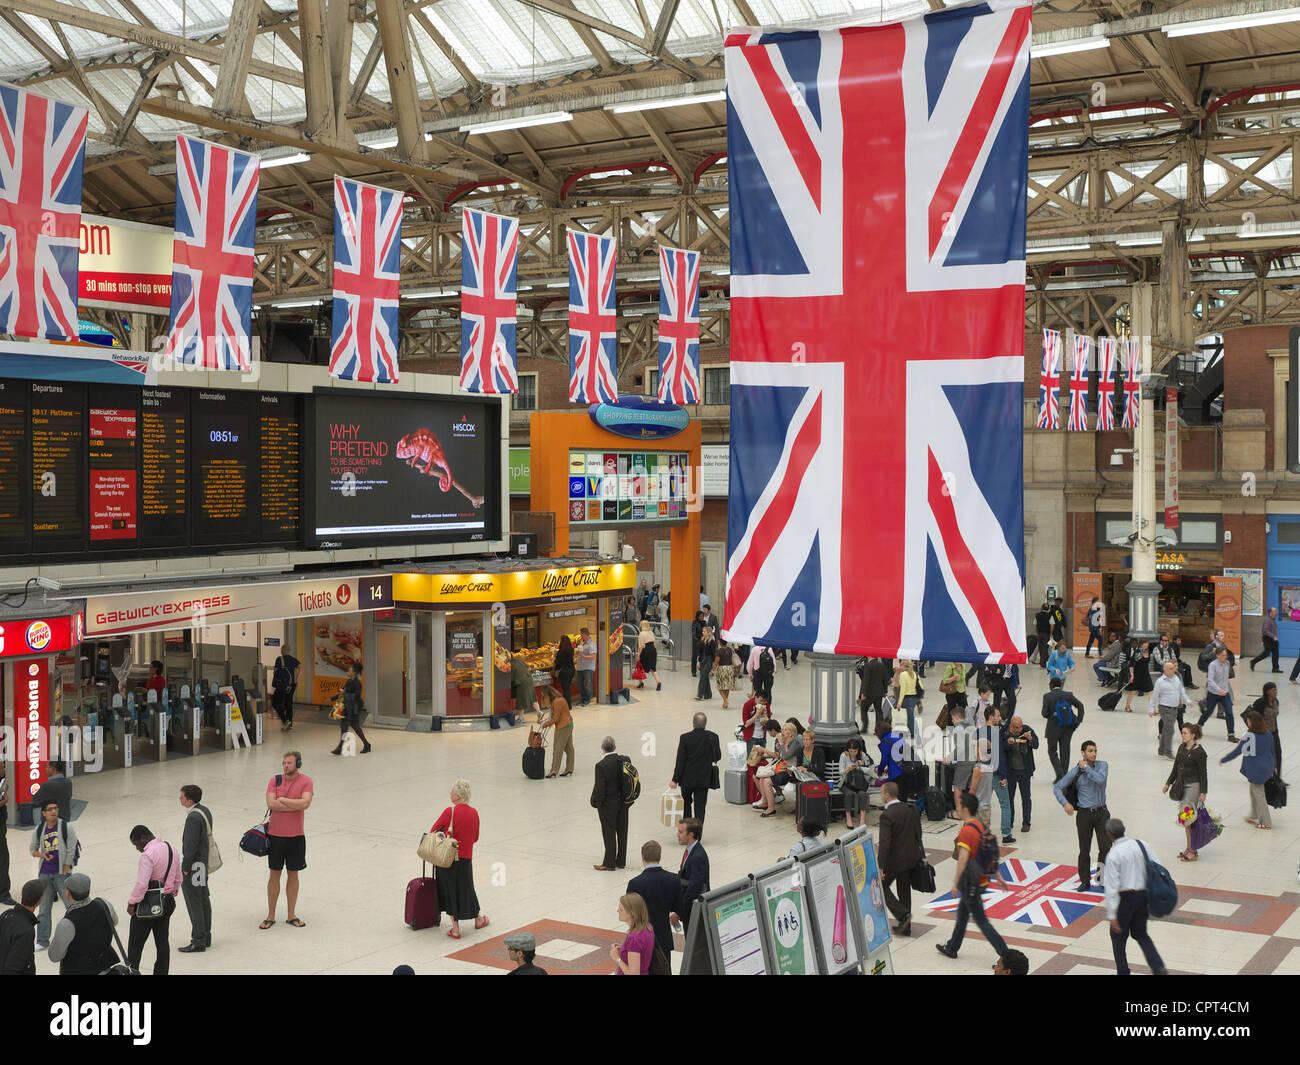 view-of-union-jack-flags-hanging-above-the-concourse-of-victoria-station-CPT4CM.jpg